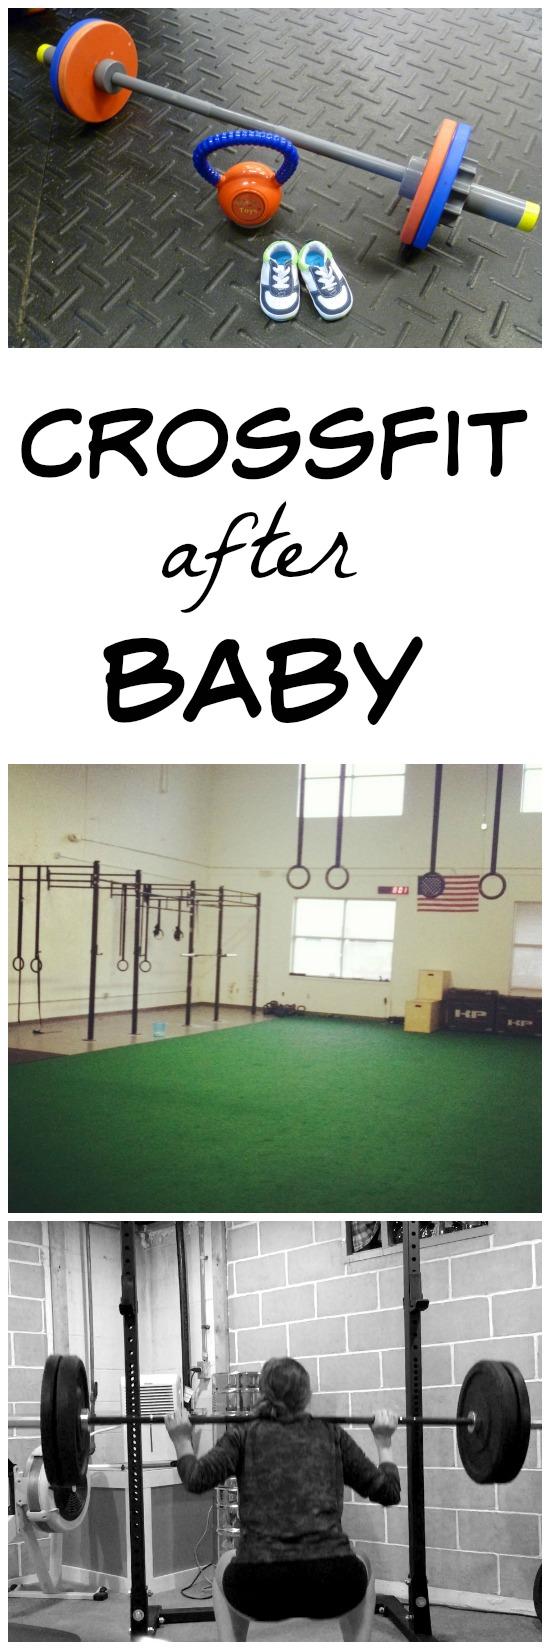 Advice for getting back into Crossfit after having a baby.